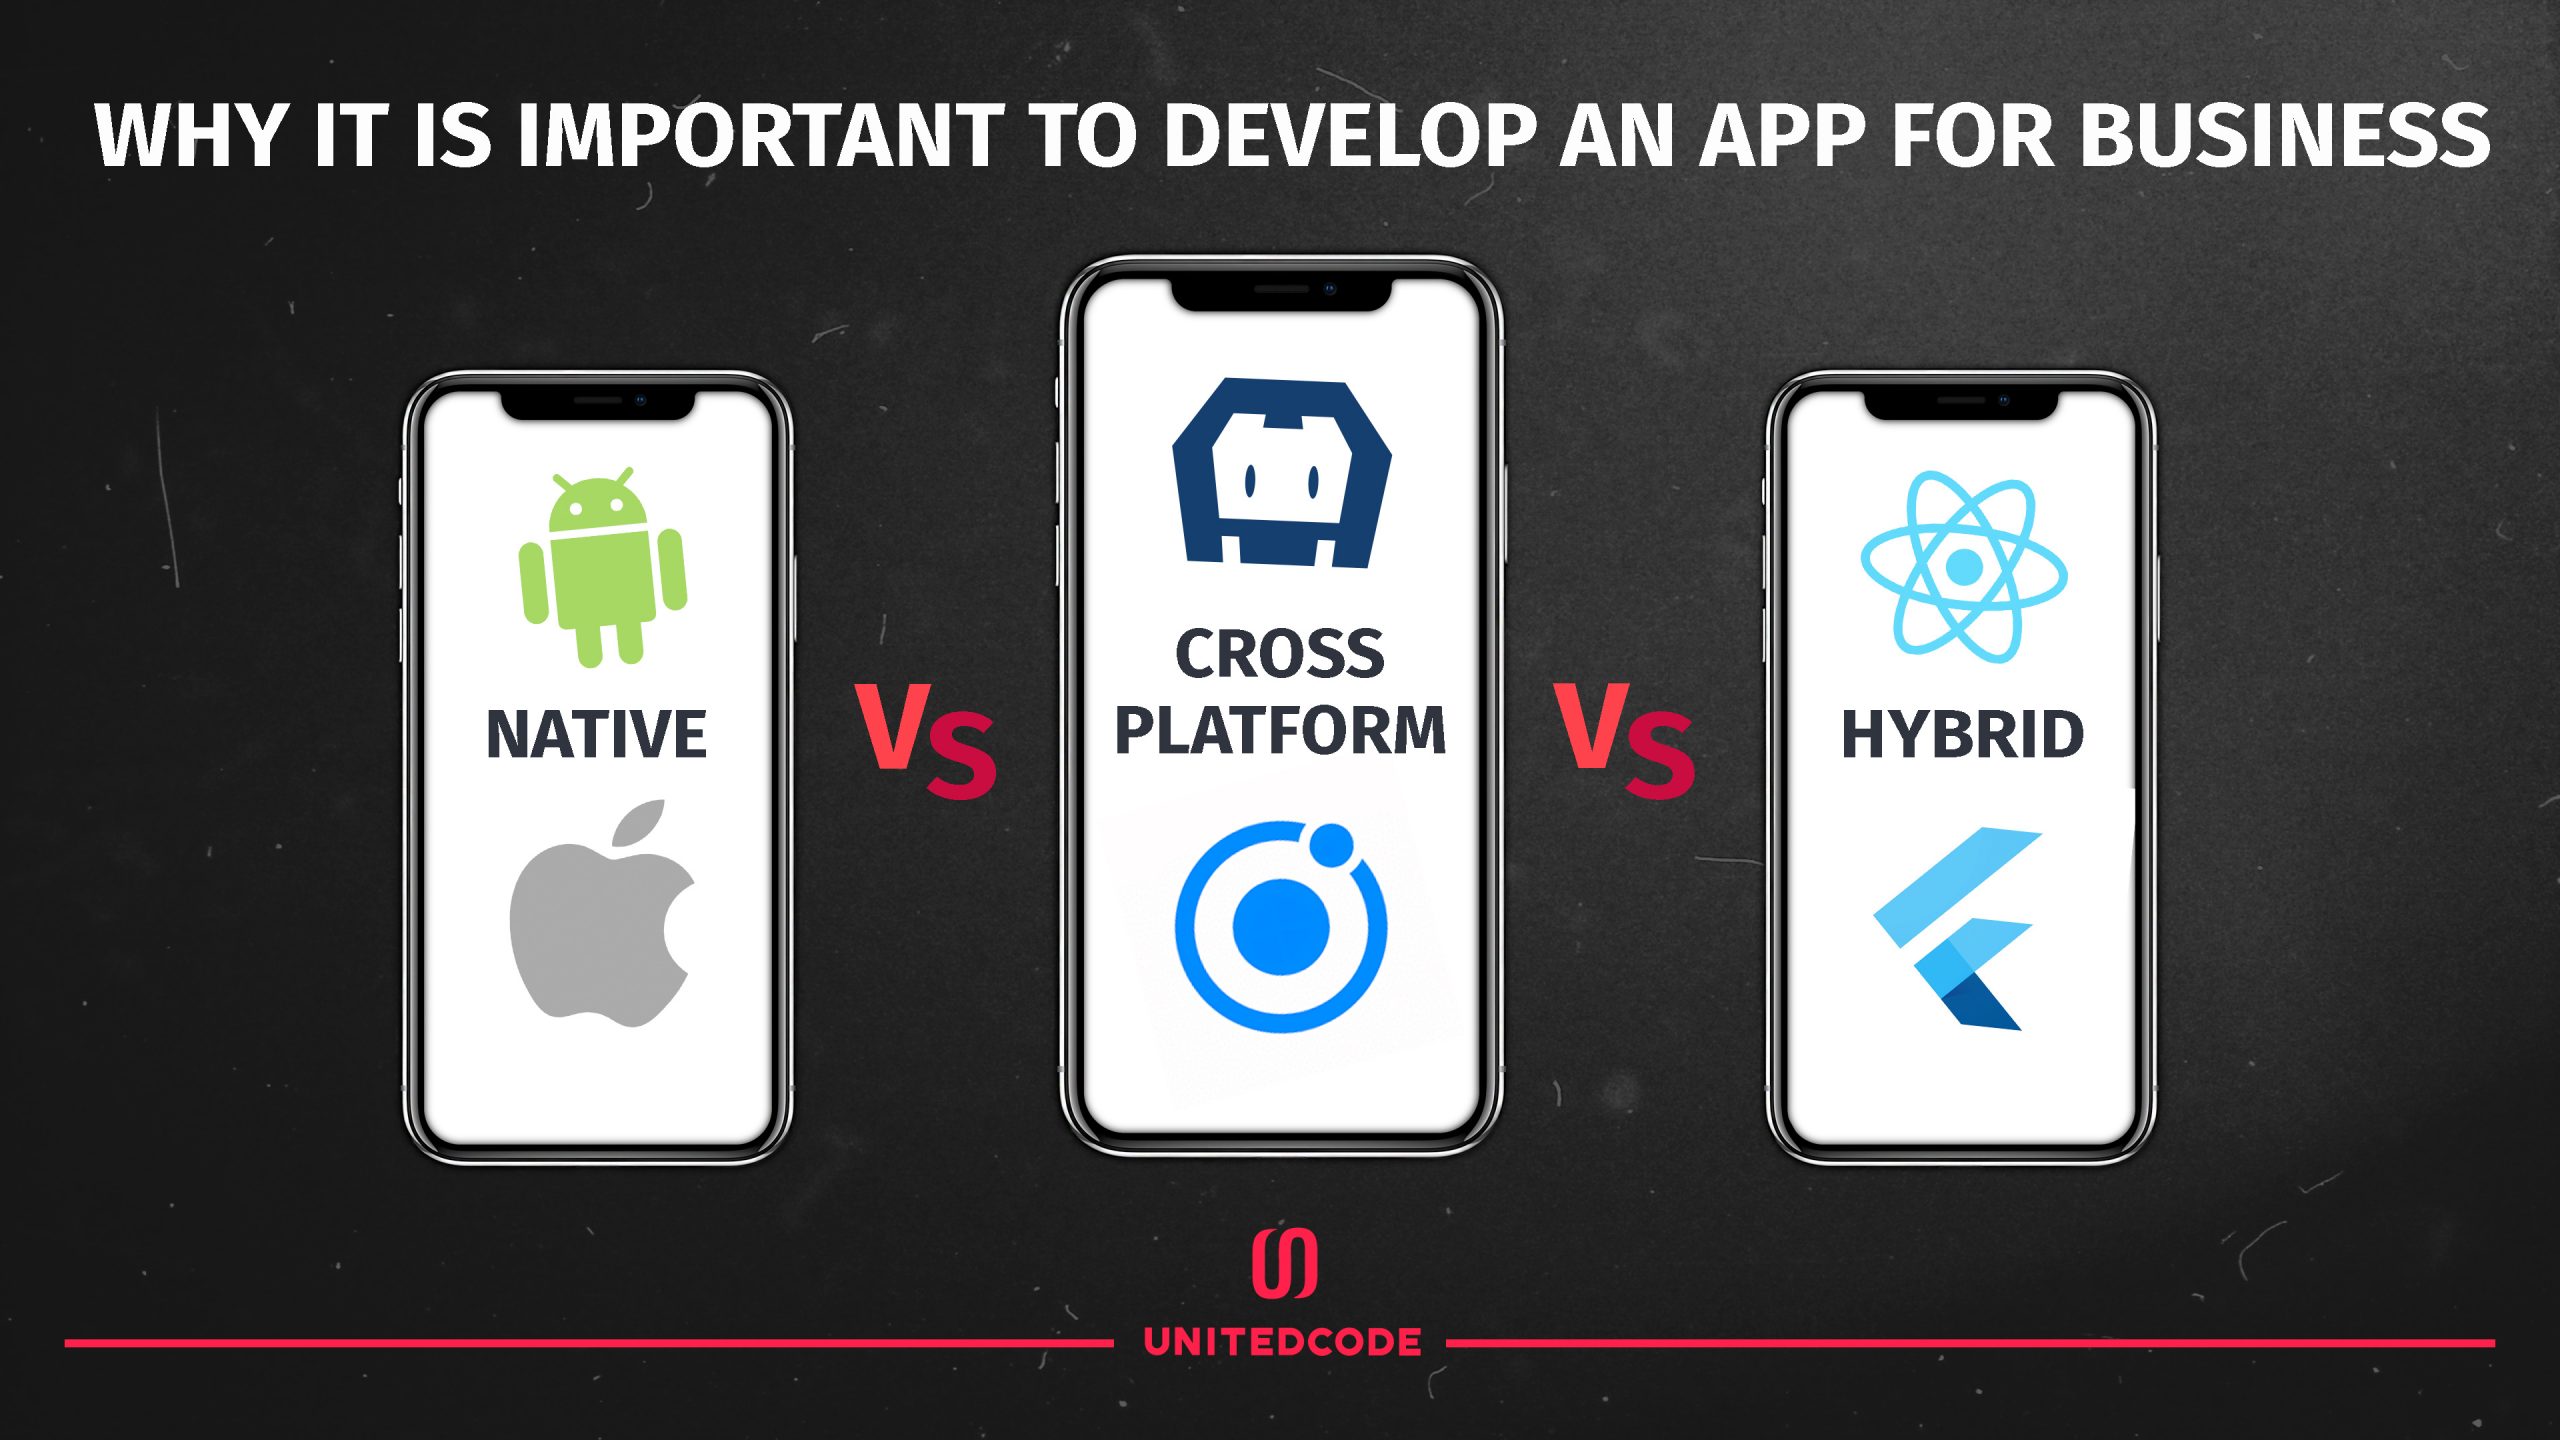 Comparison of native vs cross-platform vs hybrid app development for business. Which approach is best for your app development project?